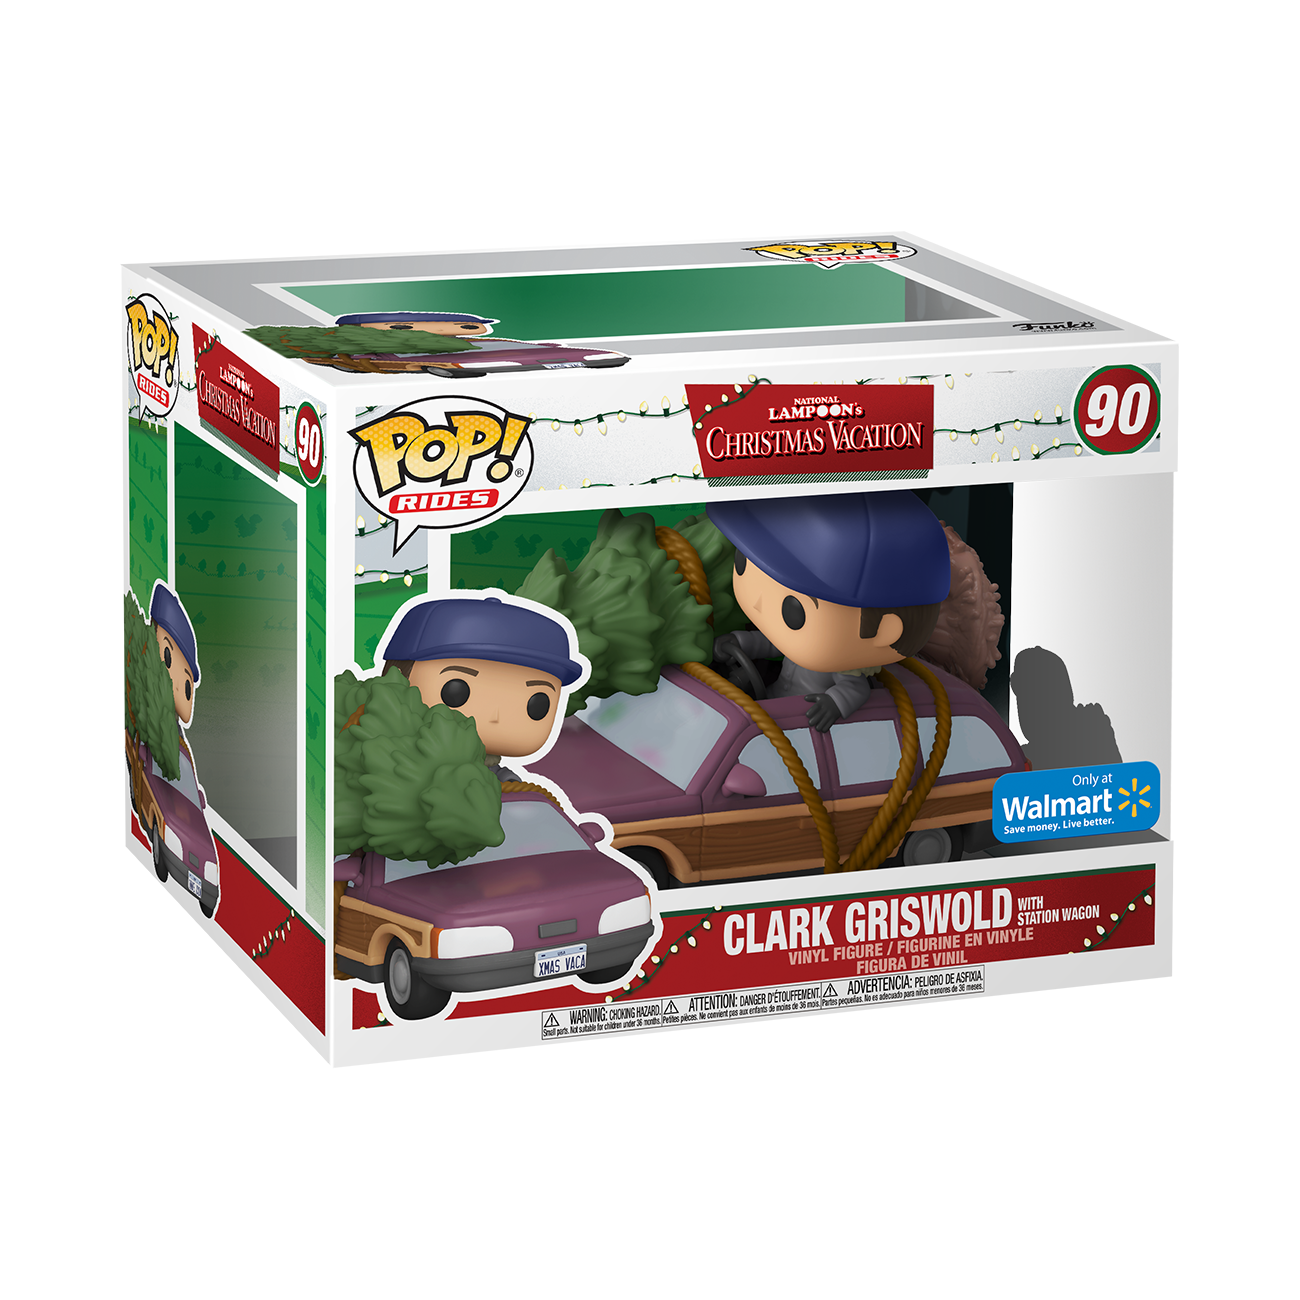 Funko POP! Clark Griswold with Station Wagon Vinyl Figure (3.75") - image 2 of 2